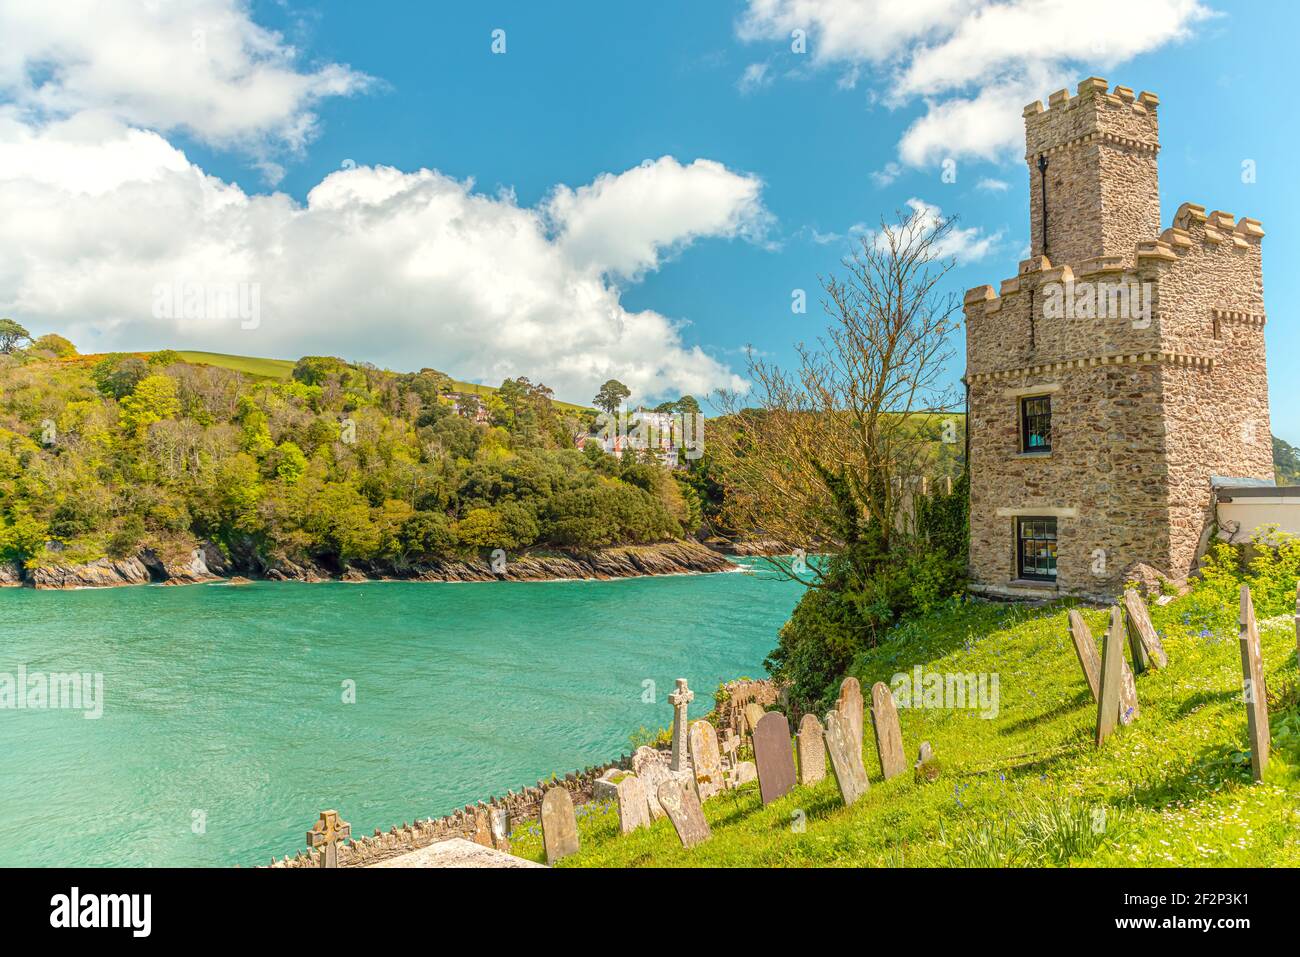 Dartmouth Castle that guard the mouth of the Dart Estuary in Devon, England Stock Photo